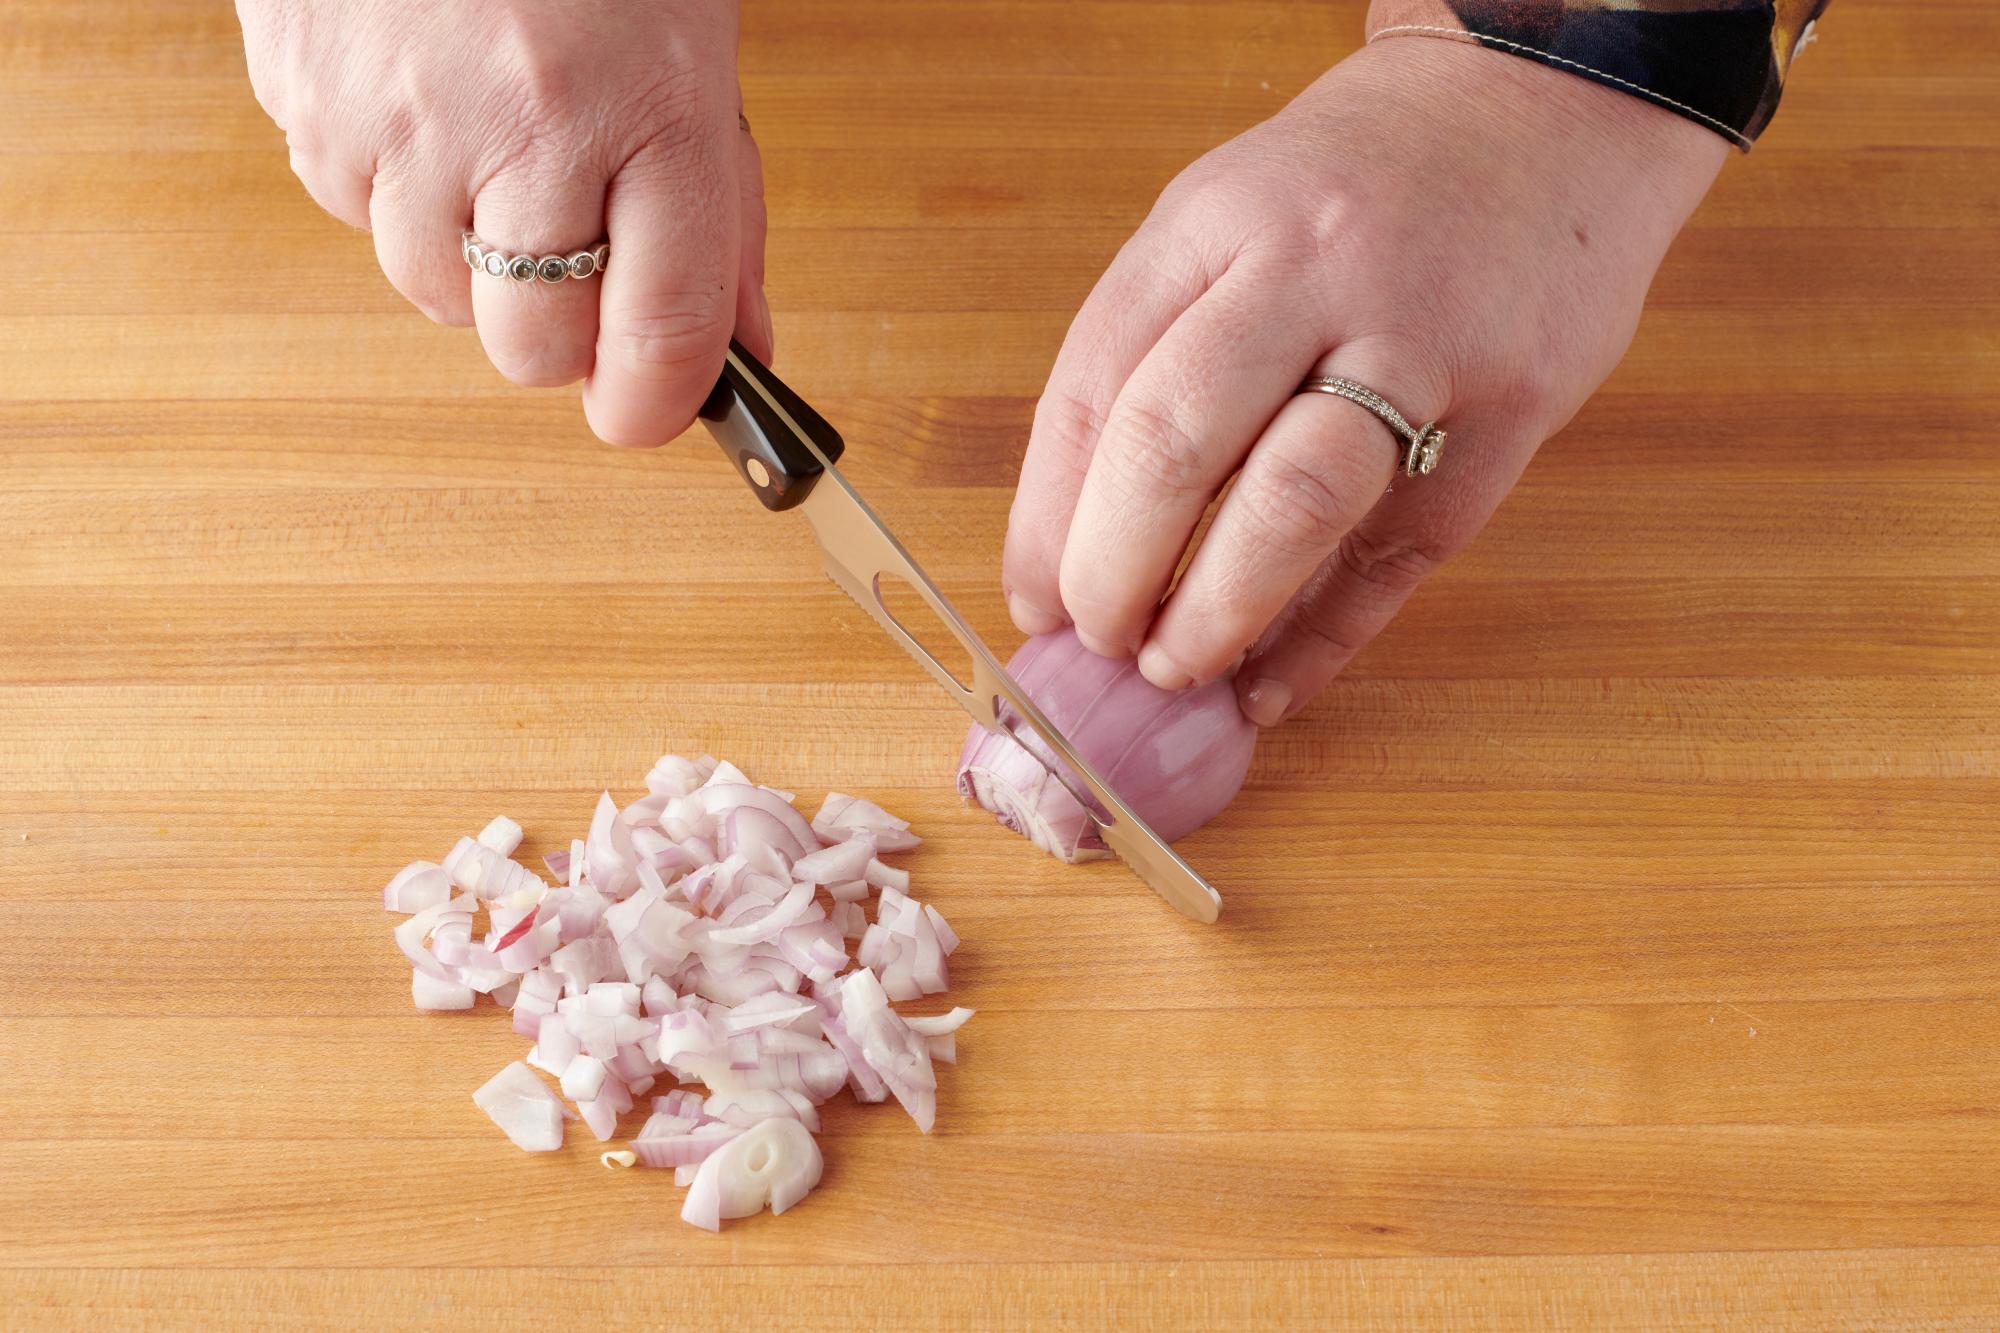 Using the Mini Cheese Knife to chop shallots.